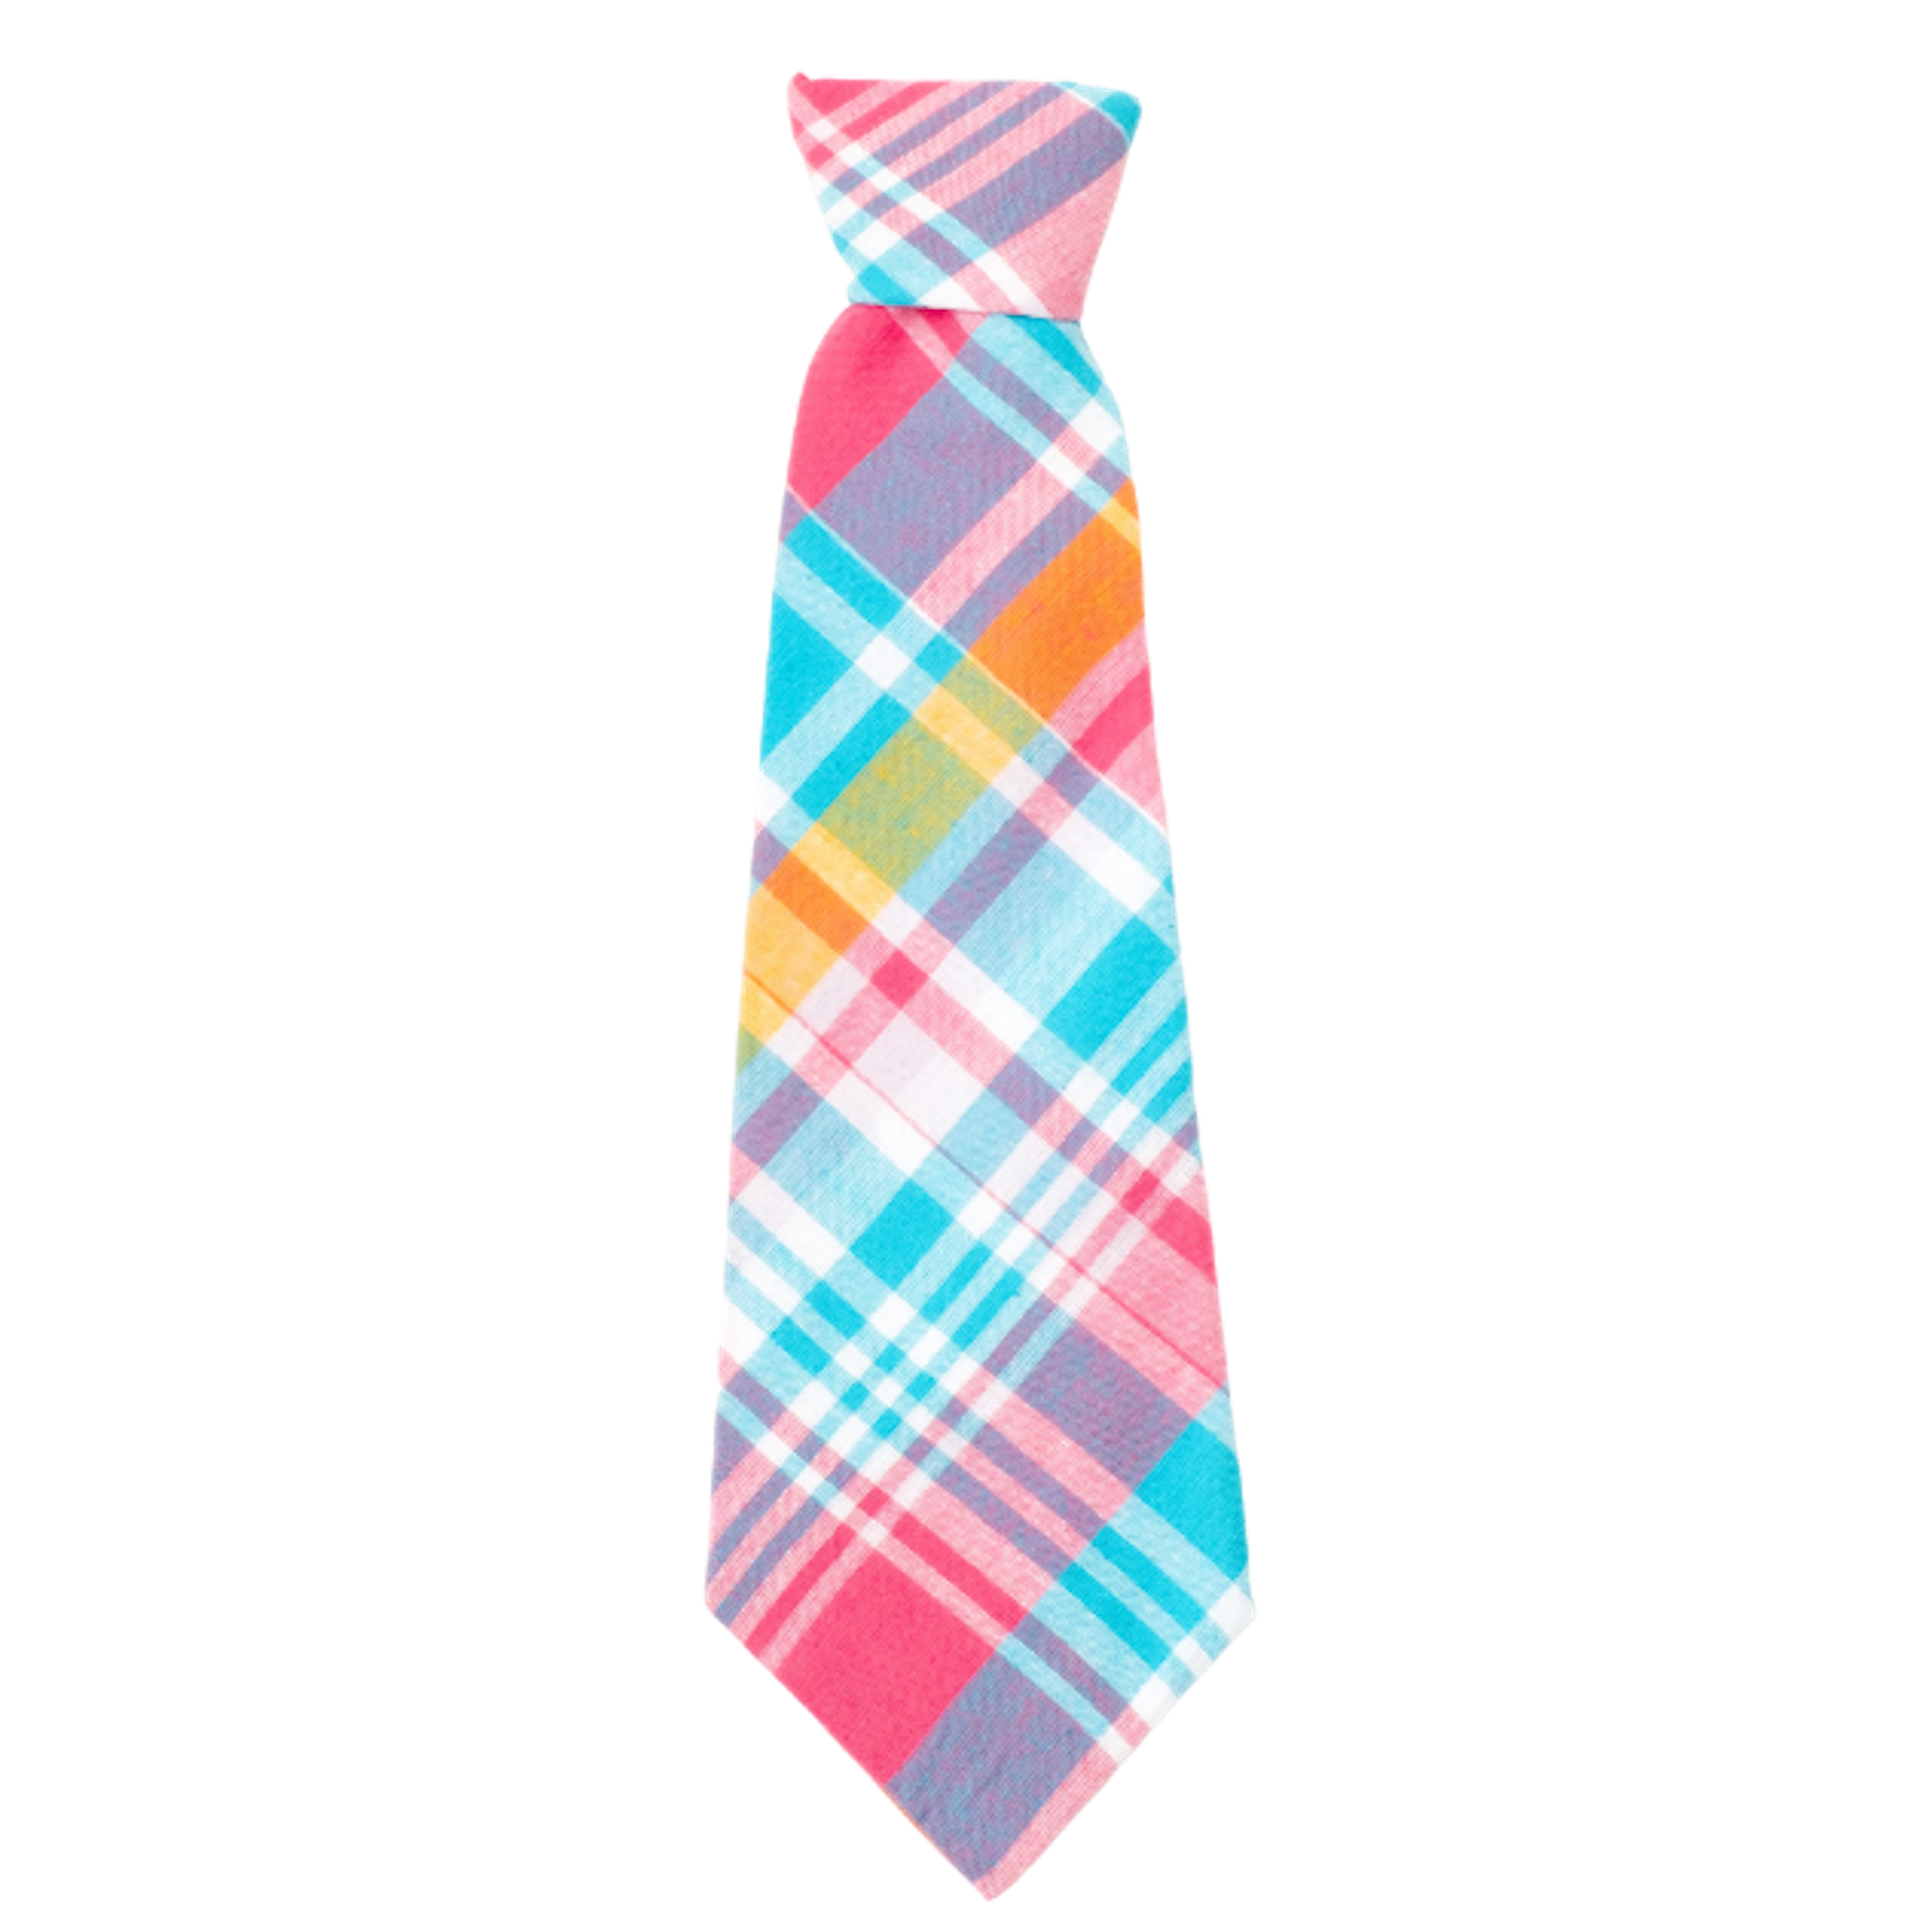 TURQUOISE-AND-PINK-MULTI-COLORED-MADRAS-PLAID-DOG-NECK-TIE